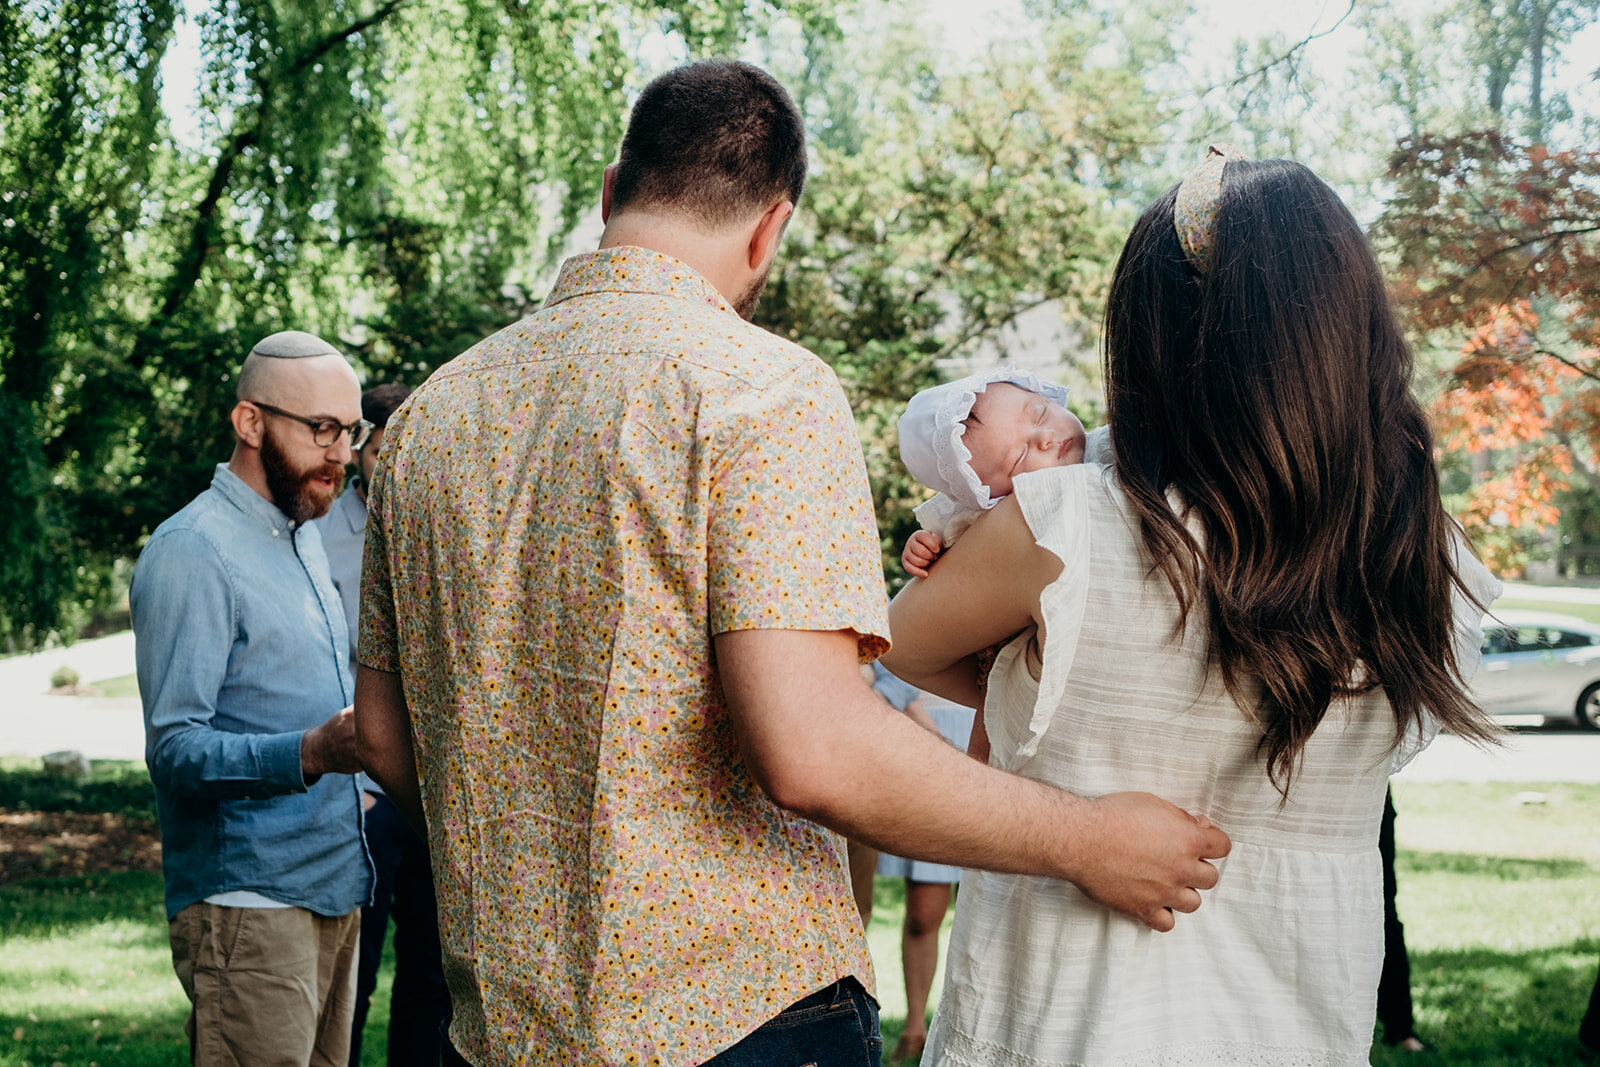 A husband embraces his wife during their daughter's Jewish baby naming ceremony.